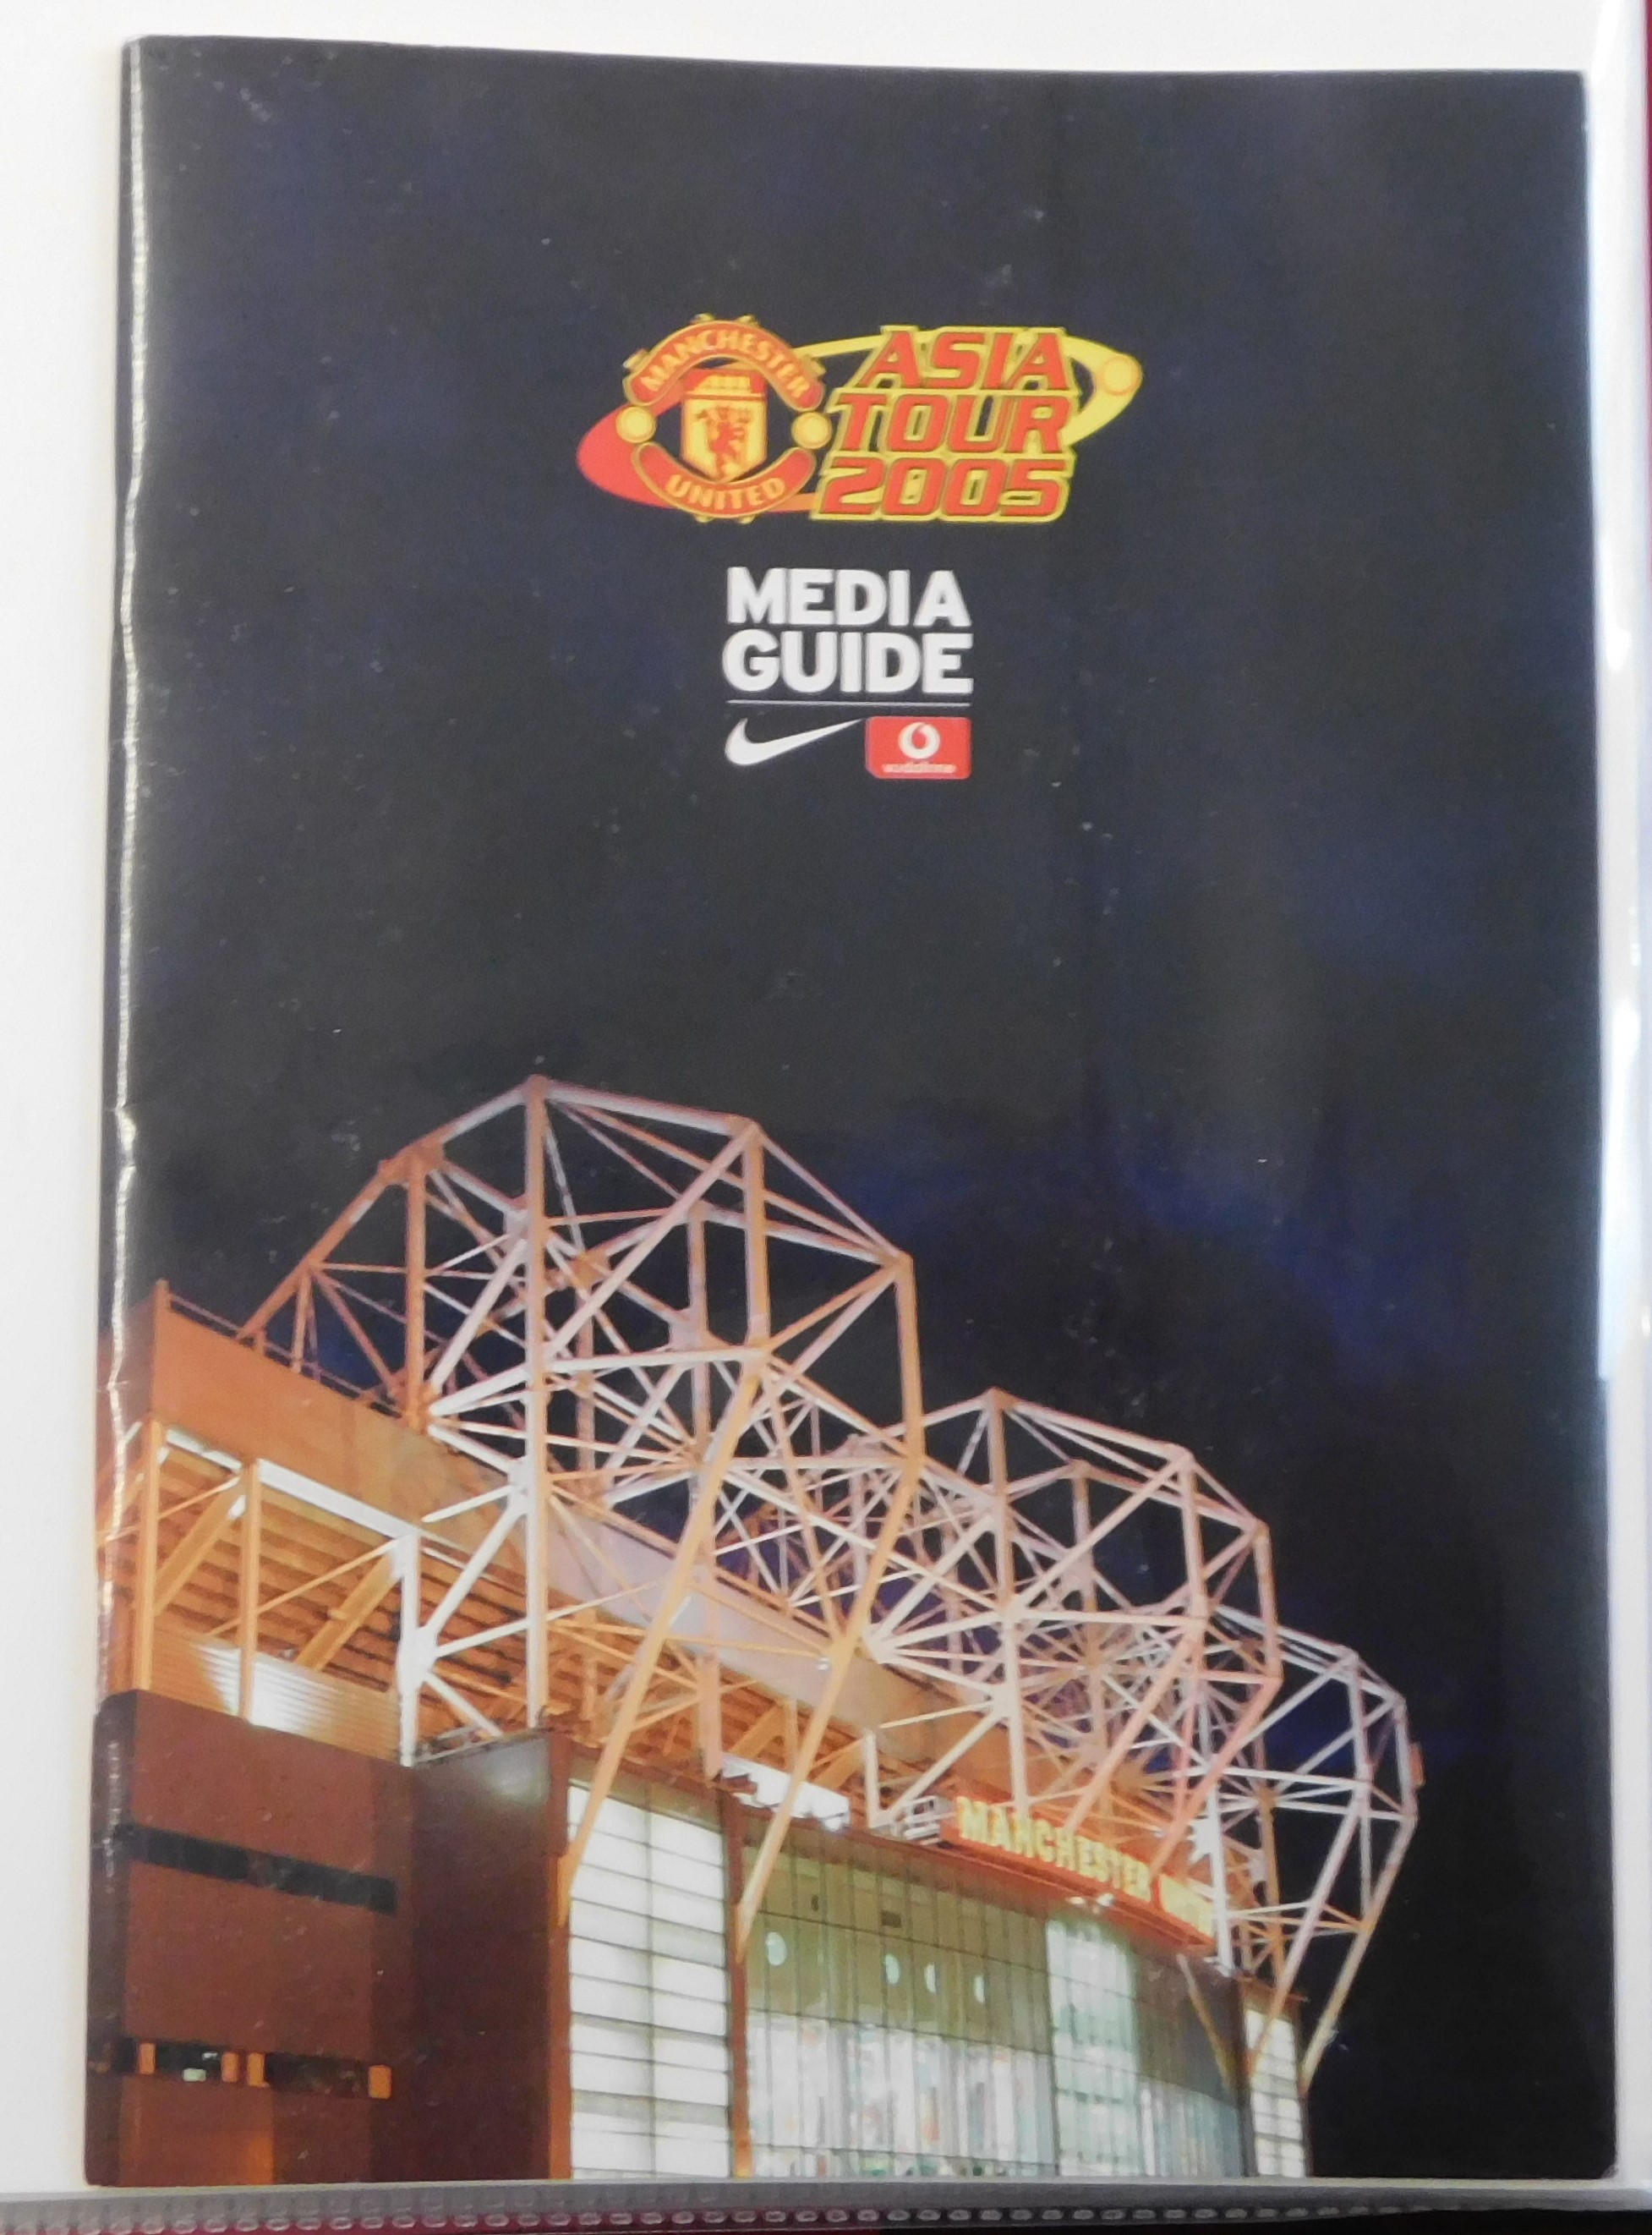 Three folders of Manchester United ephemera from the 1970s to the 2000s. A hospitality card at - Image 2 of 6